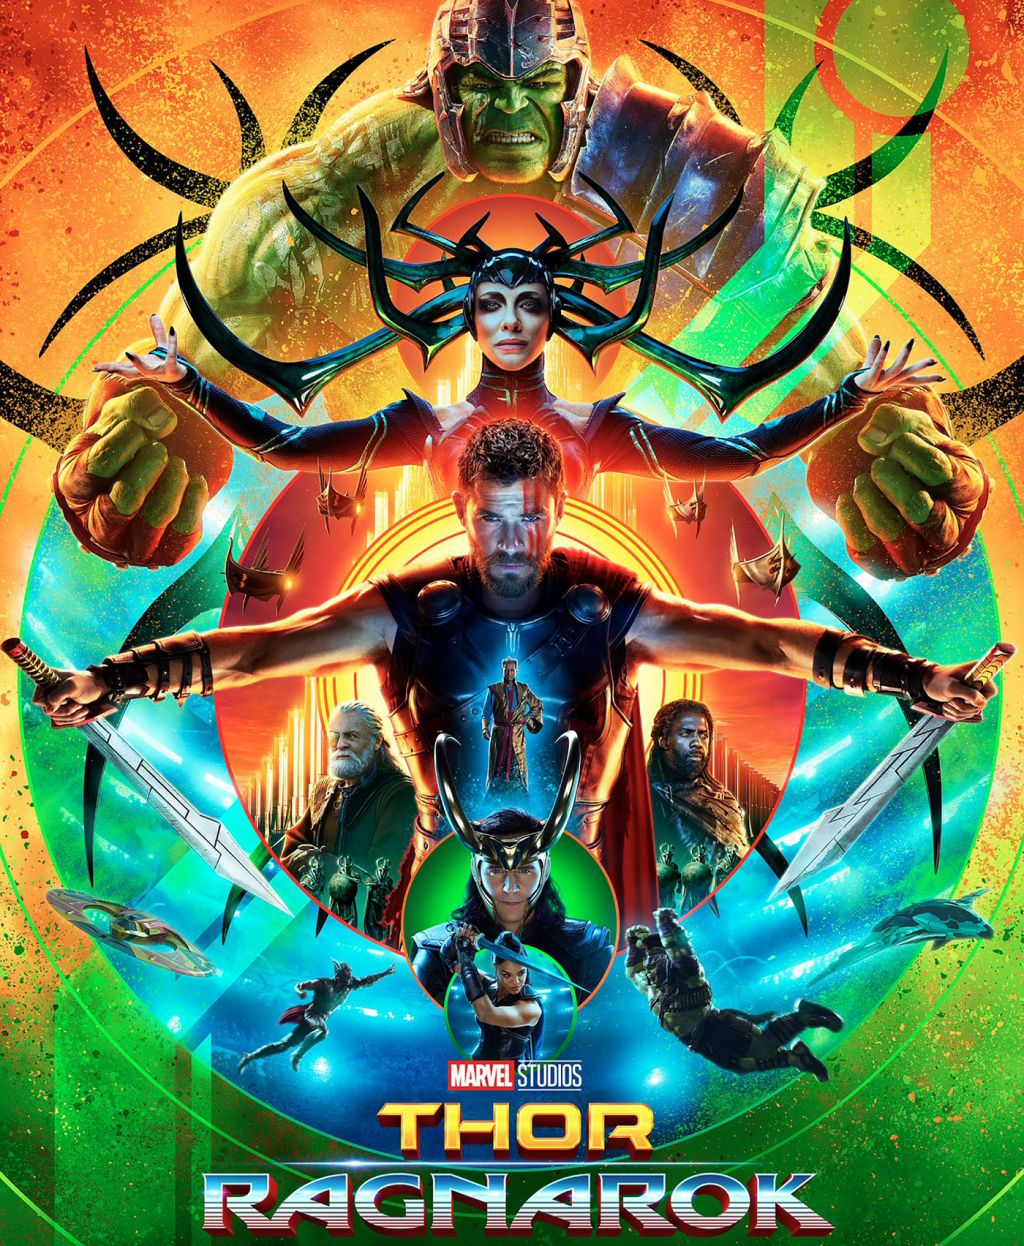 Thor: Ragnarok (2017) - Mic Wright joins Tim Worthington for a chat about The God Of Thunder taking part in Willy Wonka's Ultimate Fighting Championship in It's Good, Except It Sucks - a movie by movie - and television series by television series - hurtle through the Marvel Cinematic Universe.